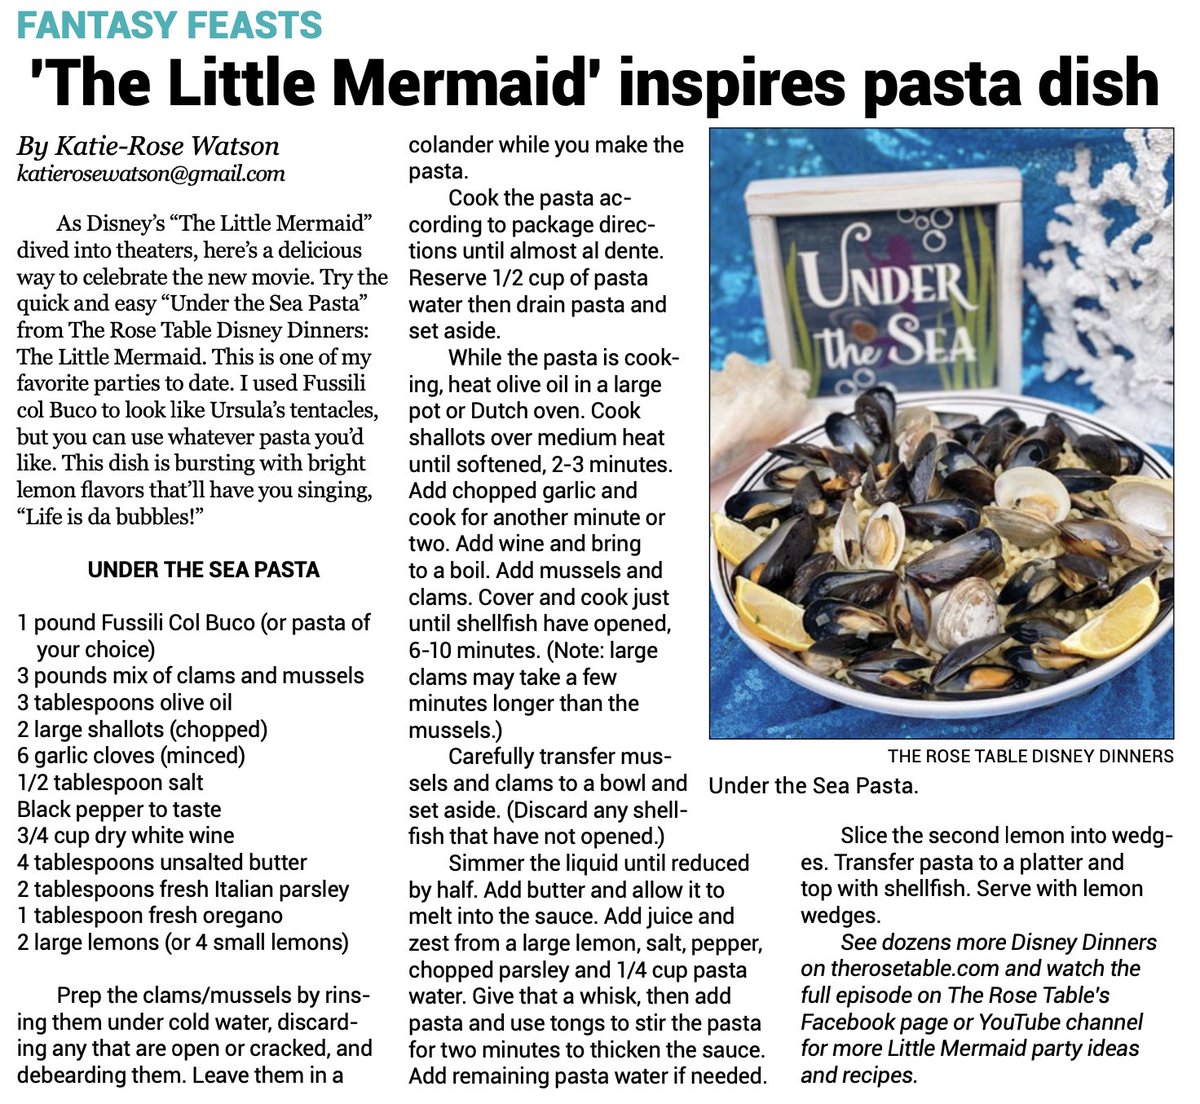 Huge thank you to @KatyTrailWeekly for featuring my Under the Sea Pasta in the paper last week. 🧜‍♀️

Get all of my #littlemermaid recipes here: therosetable.com/category/enter…

#TheLittleMermaid